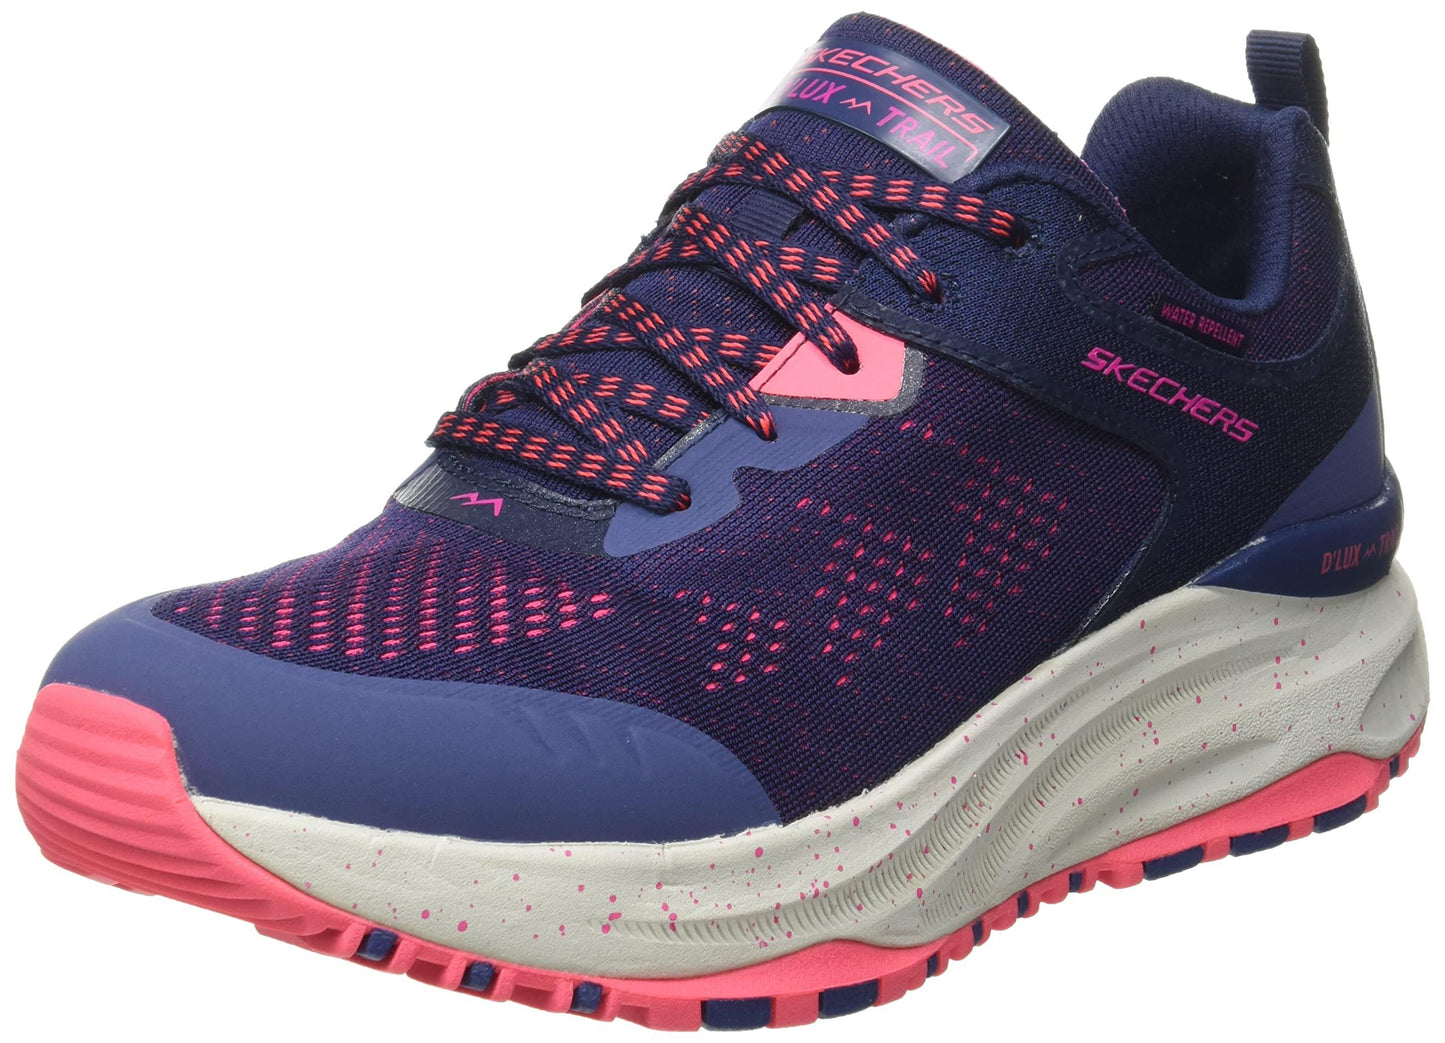 Skechers Ladies D’Lux Trail Round Trip Navy/Pink Vegan Trainers Shoes 149842NVHP